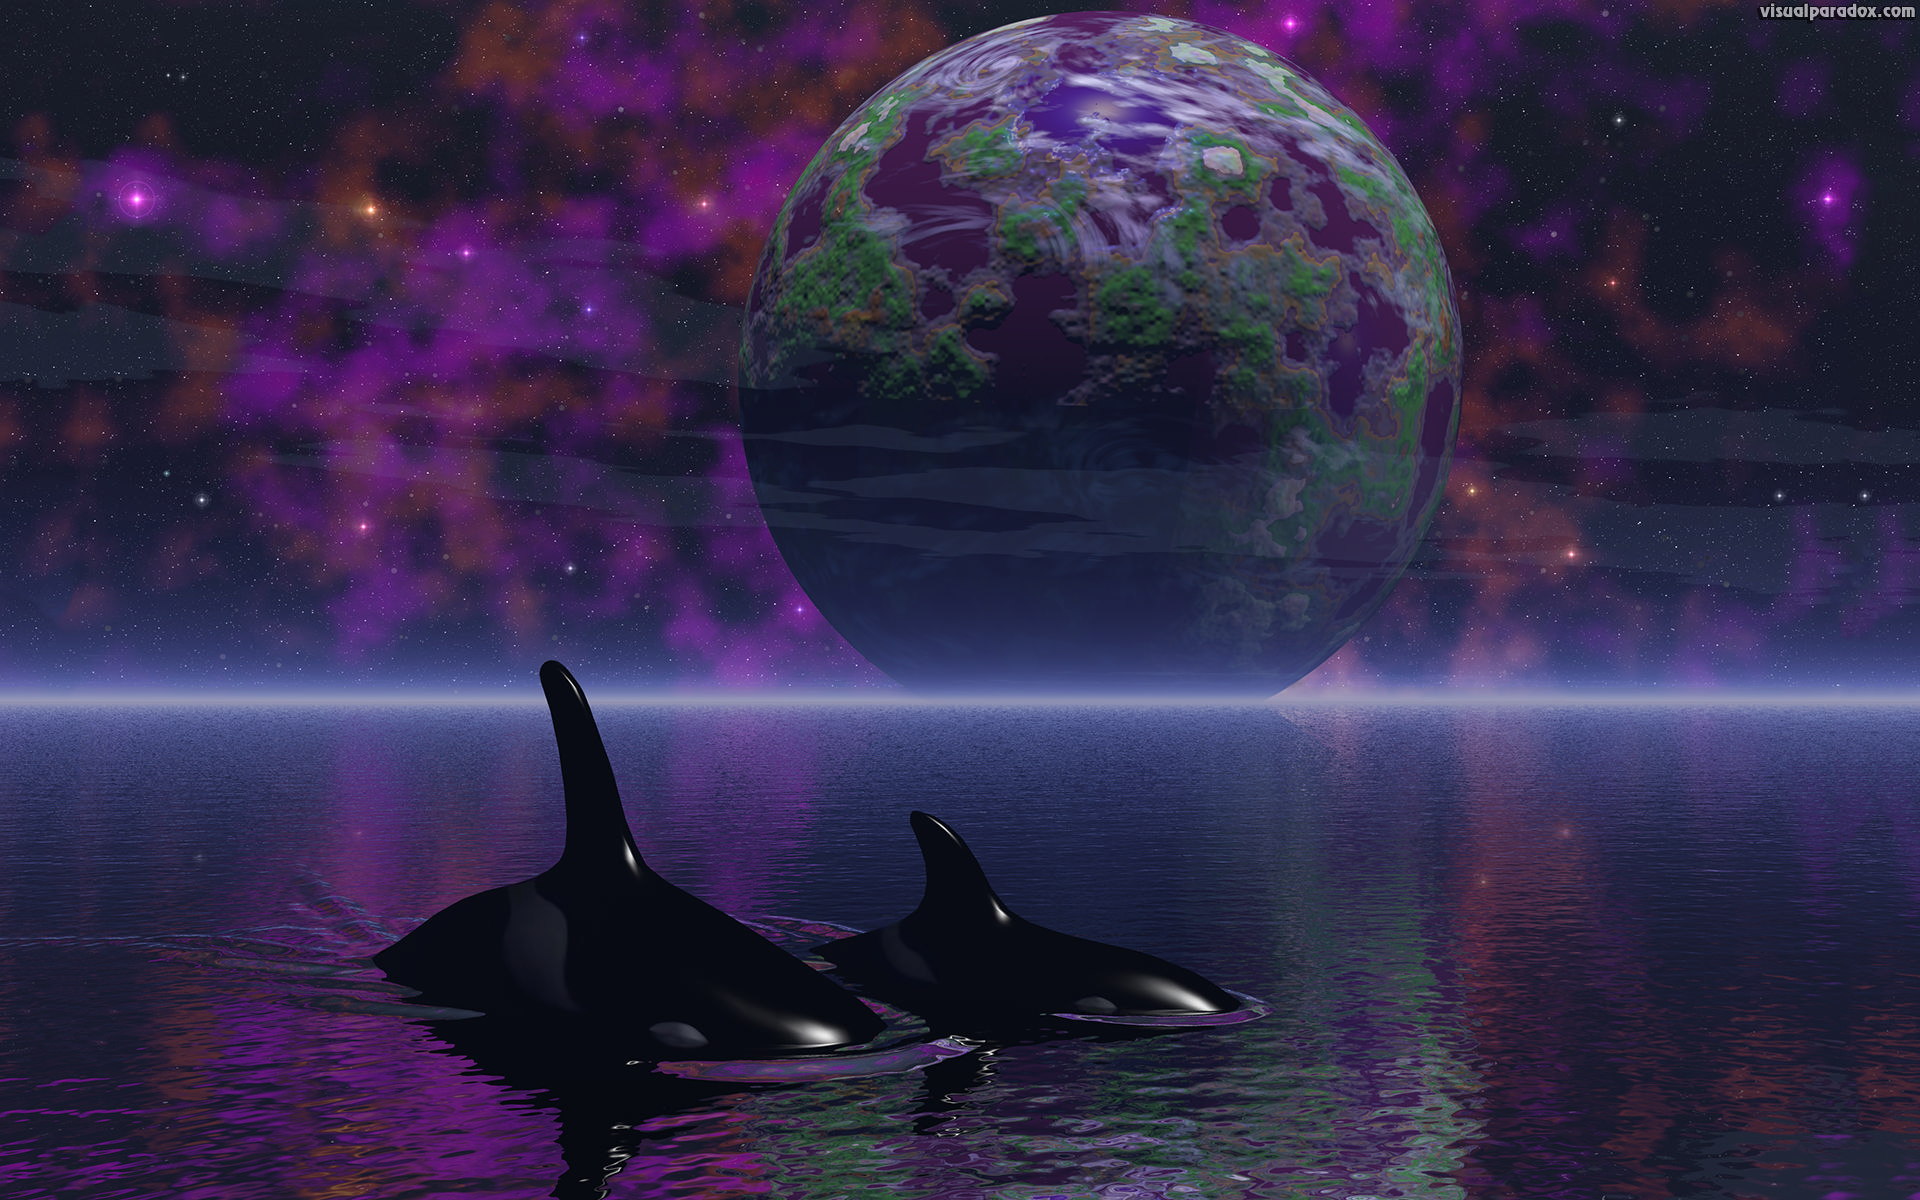 killer whales, planet, space, ocean, water, spiritual, stars, space, orca, whales, planets, 3d, wallpaper